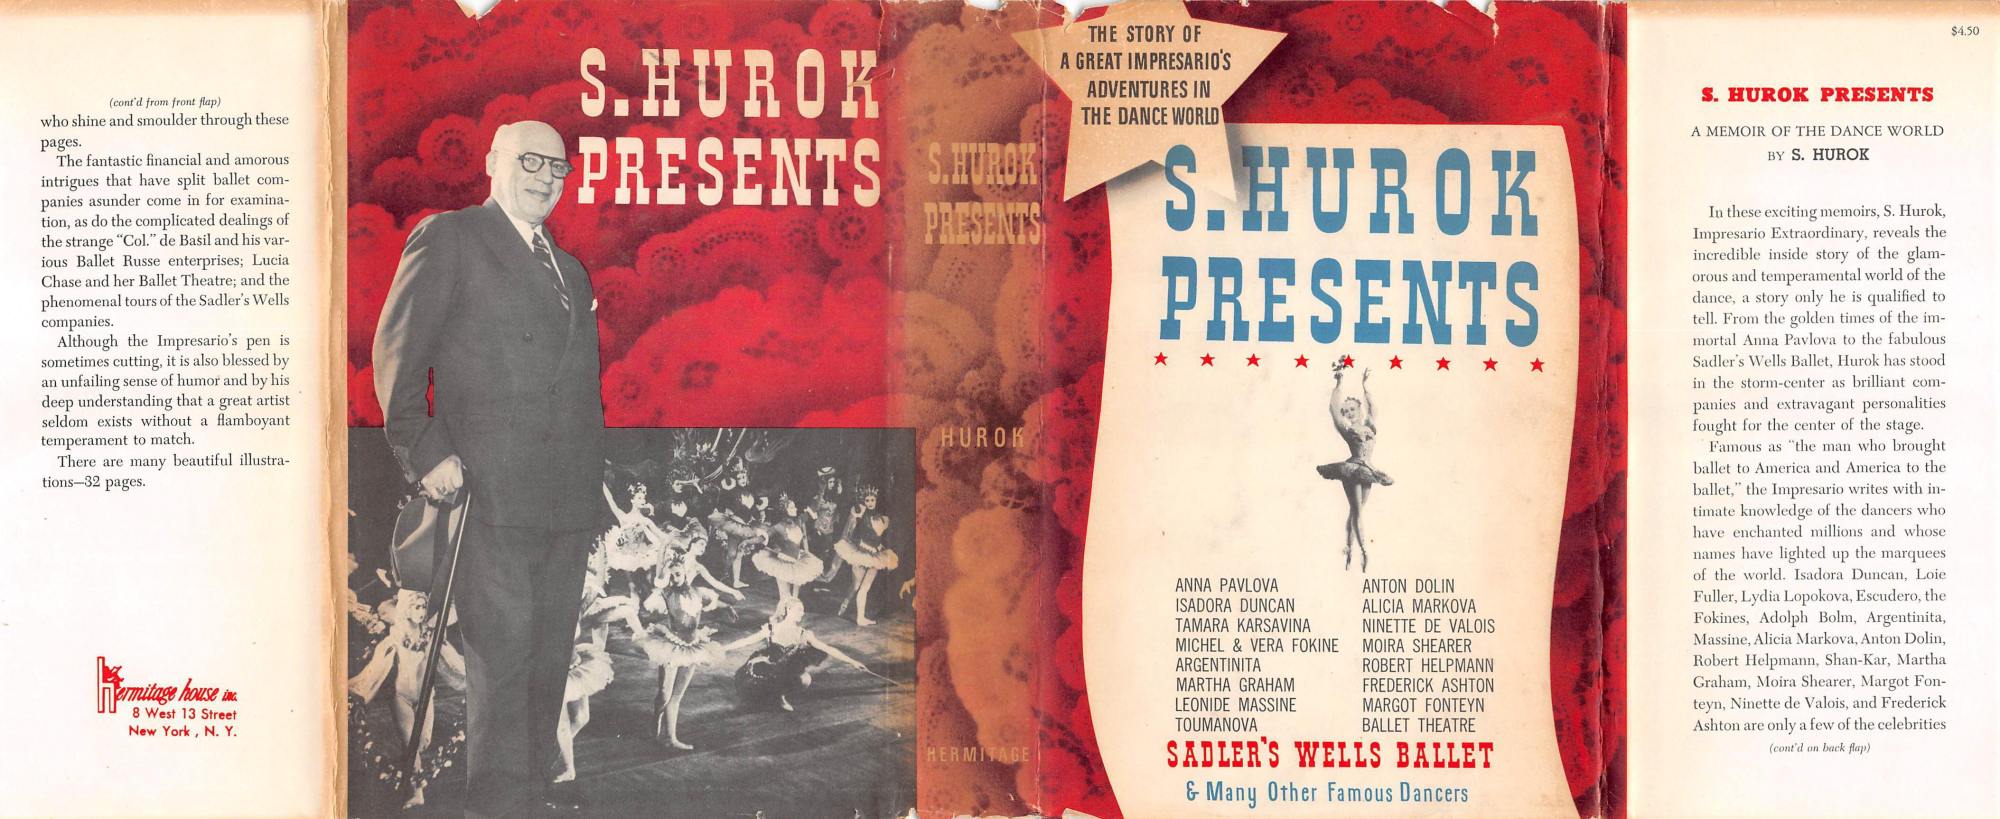 The Project Gutenberg eBook of a memoir of the Dance World, by Sol Hurok. picture